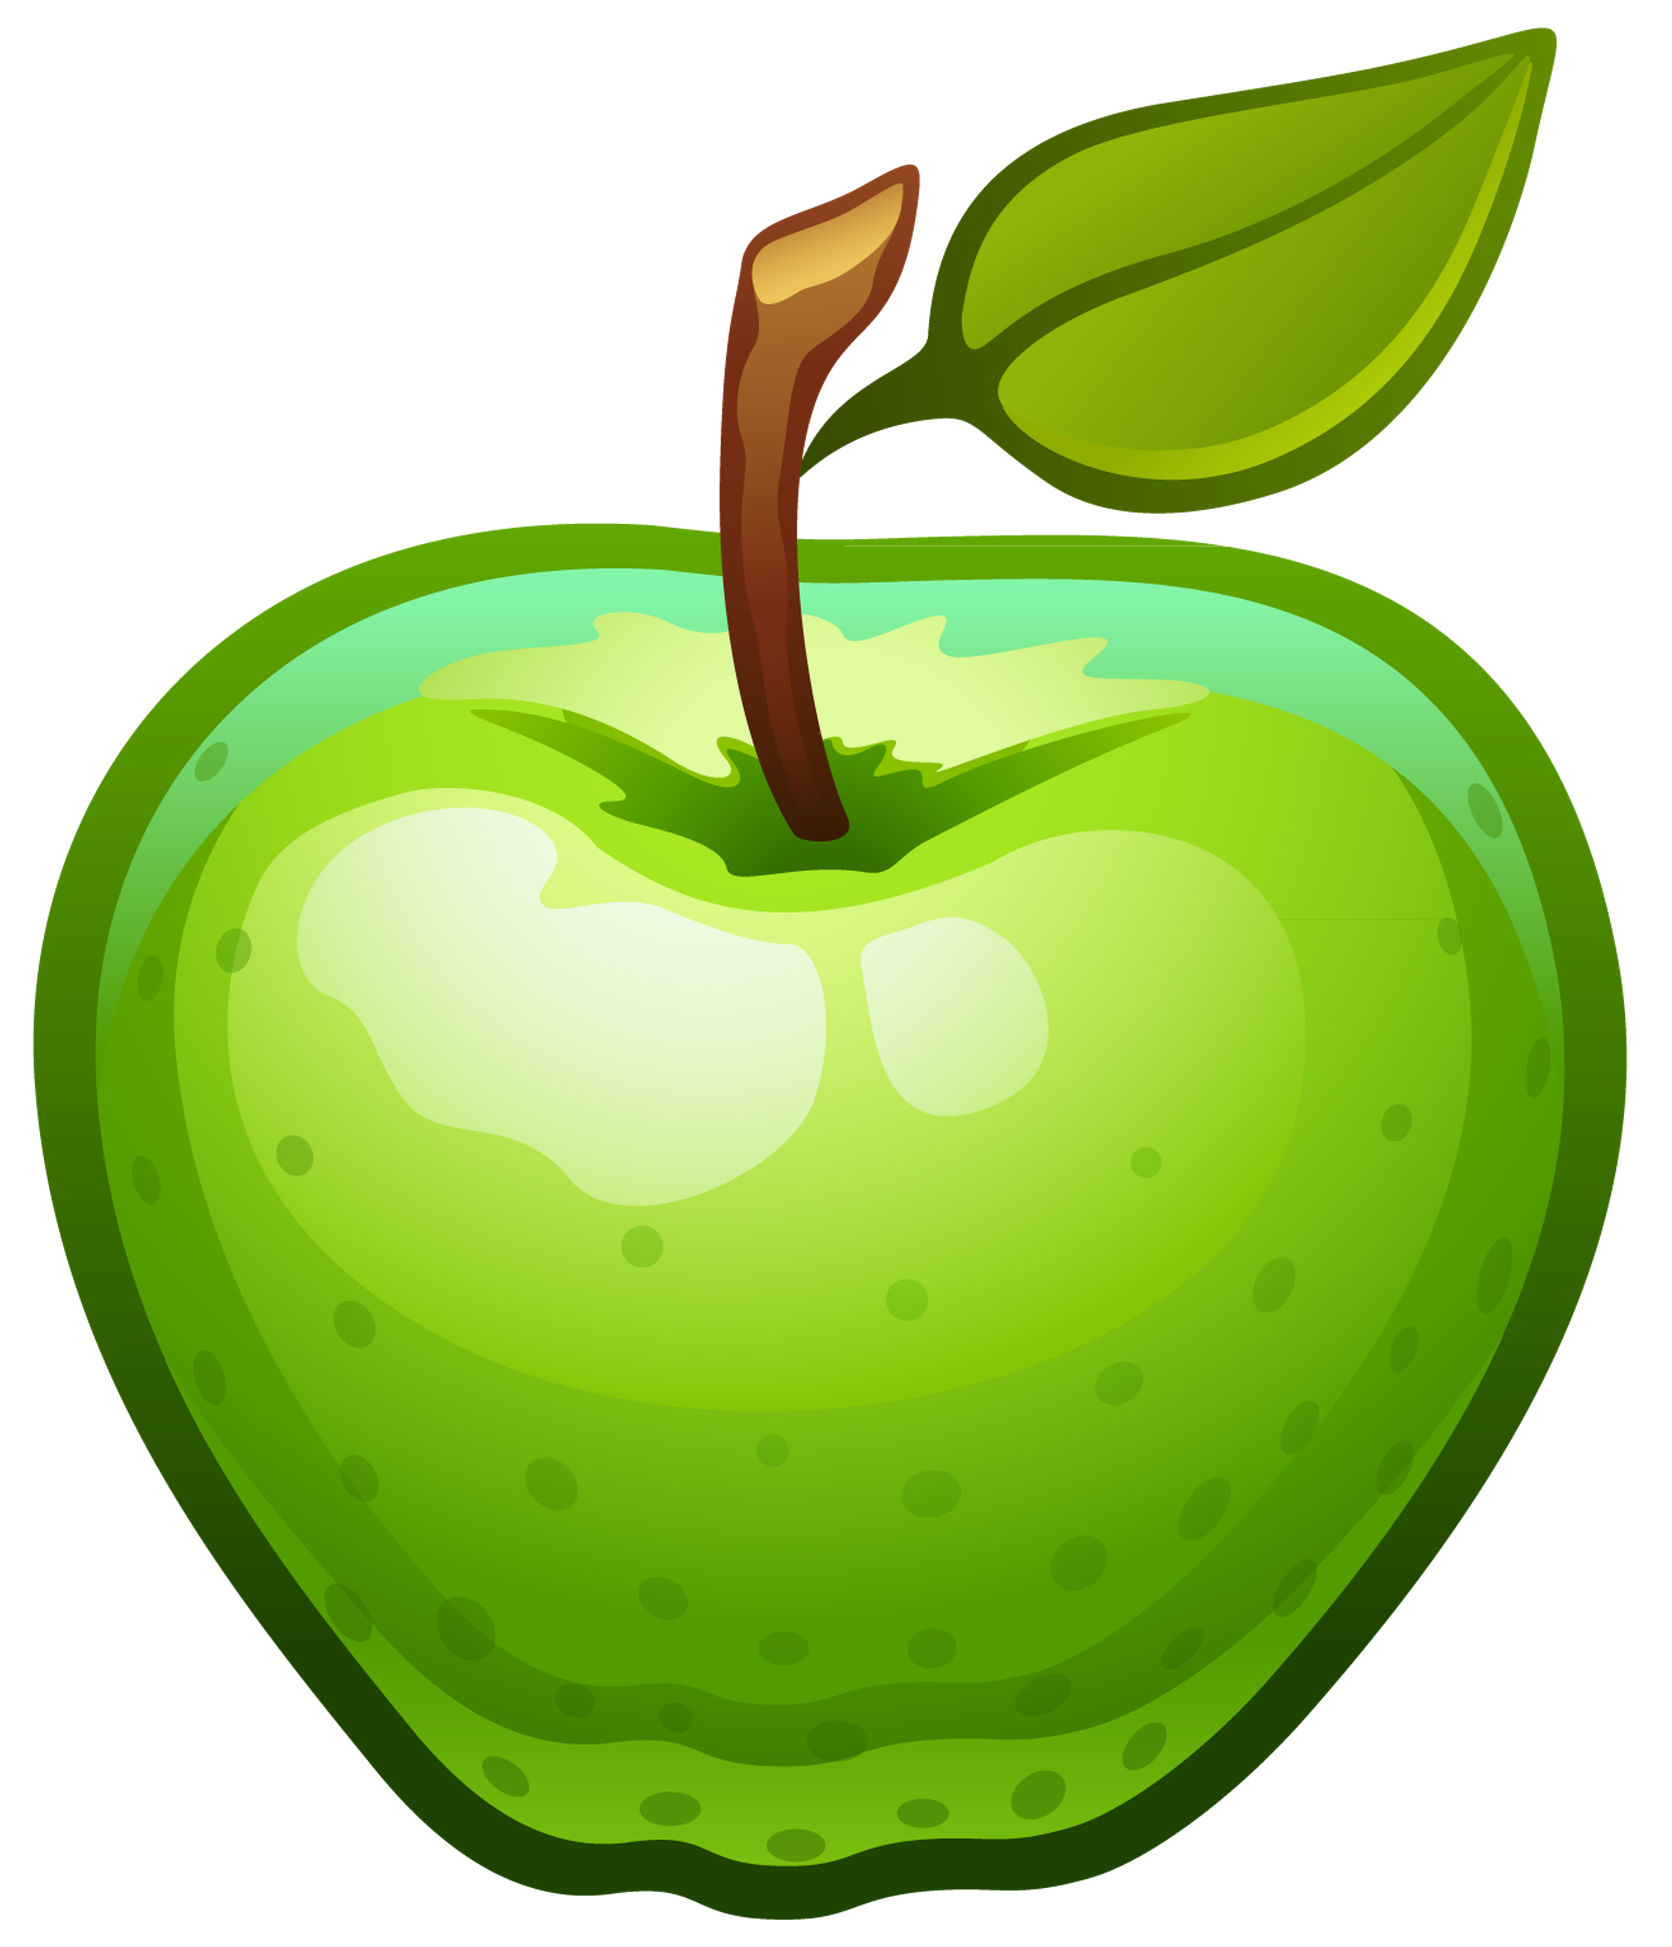 Green apple core clipart no background